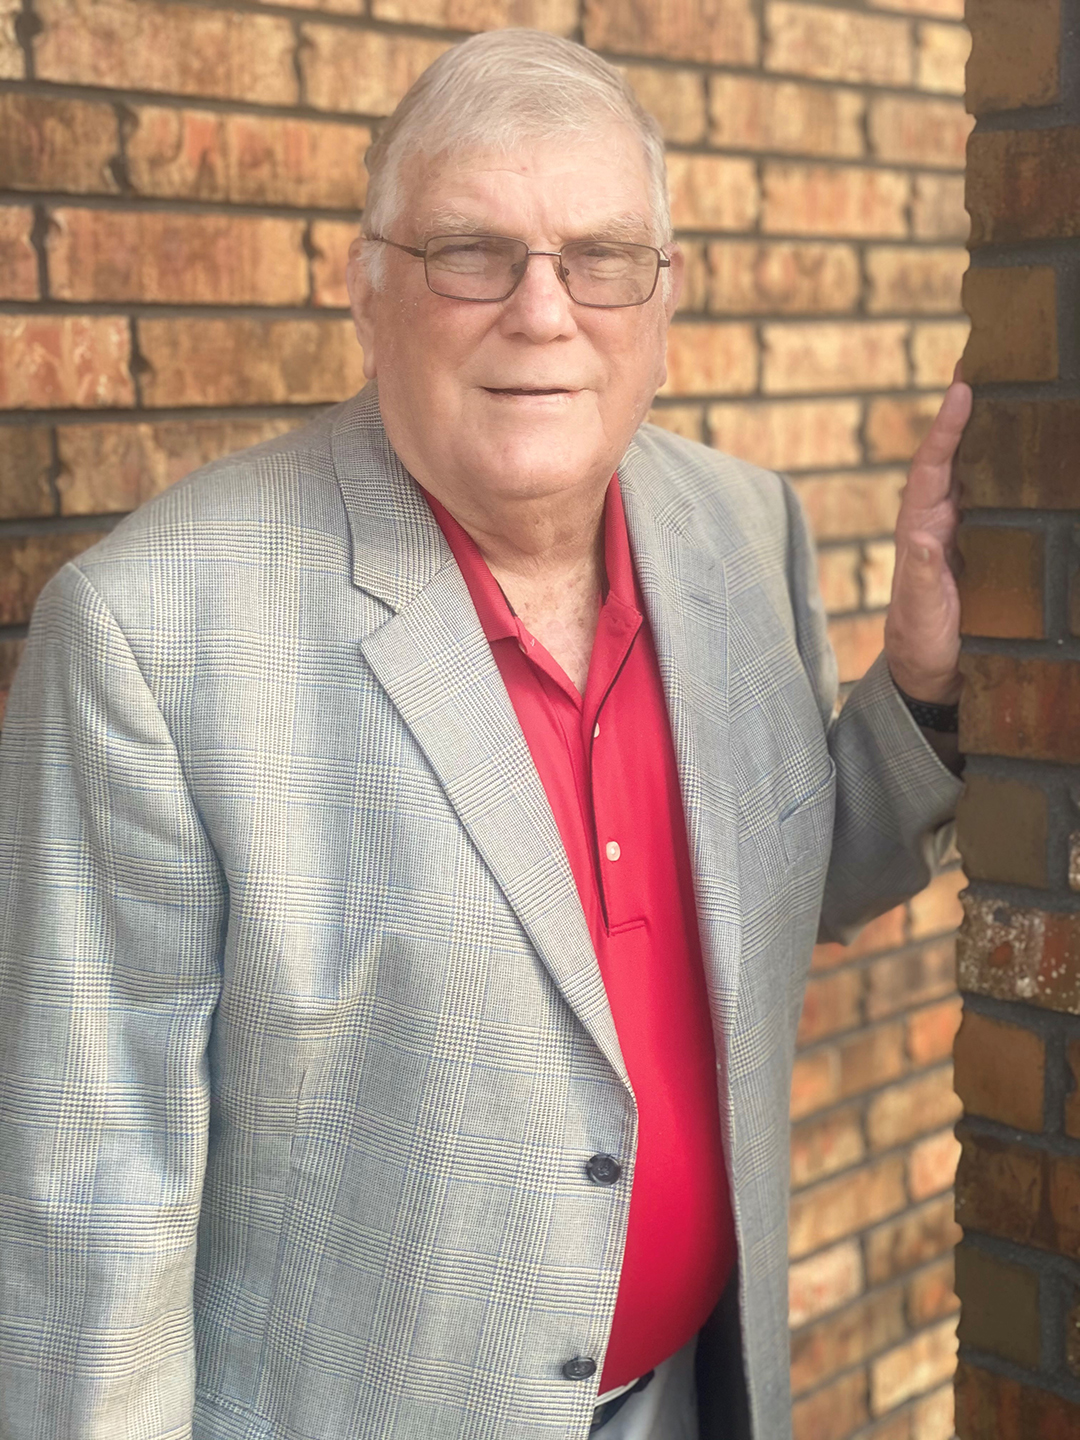 A man in his 80s leans on a brick pillar, smiling at the camera. He is wearing glasses, a red polo, and gray blazer.